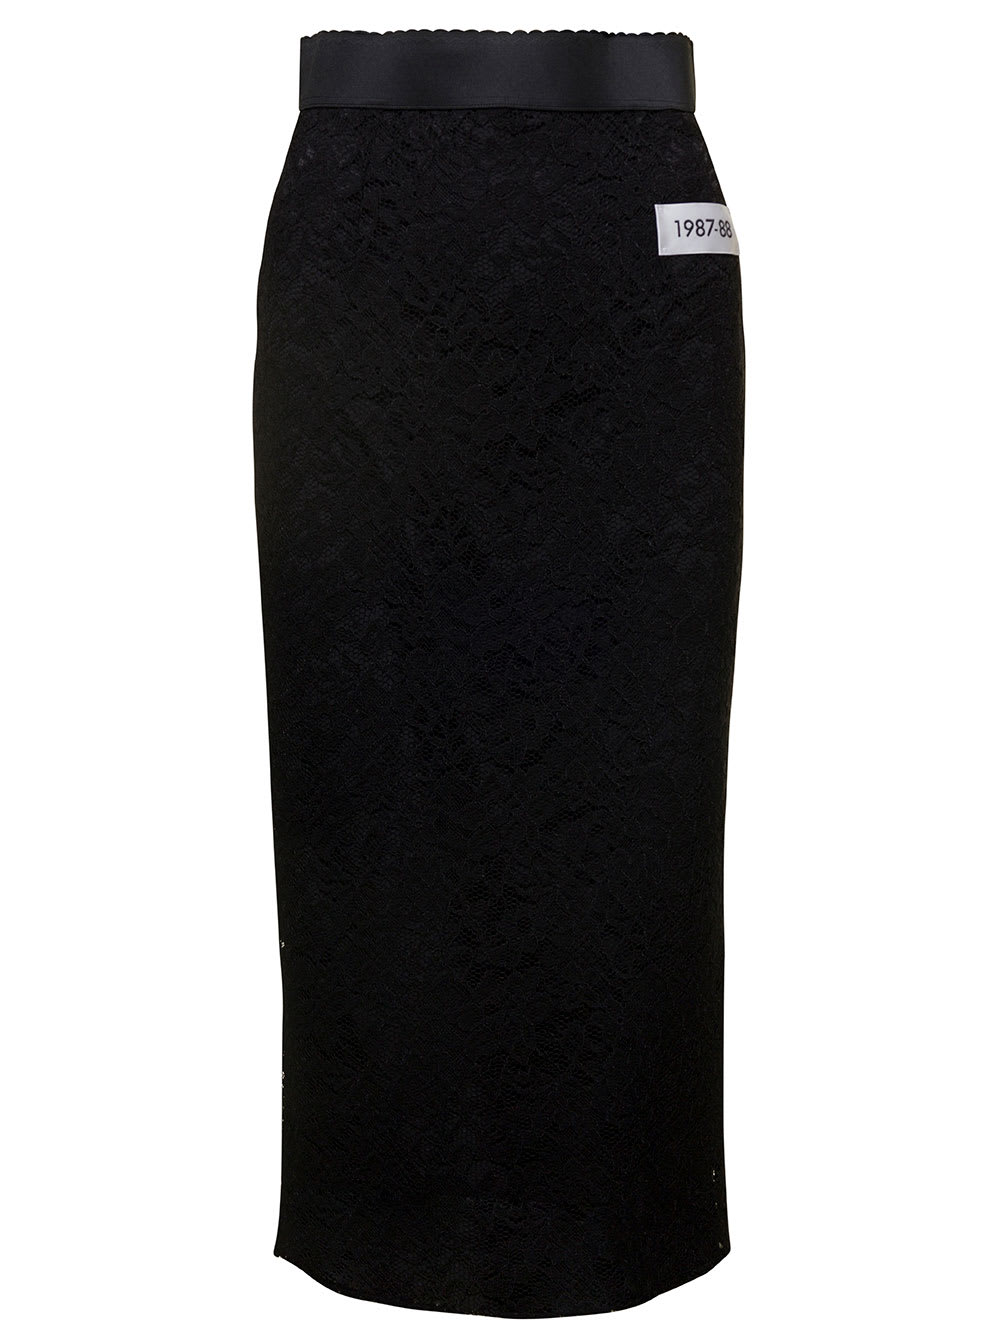 DOLCE & GABBANA BLACK HIGH WAISTED PENCIL SKIRT WITH PATCH IN VISCOSE WOMAN